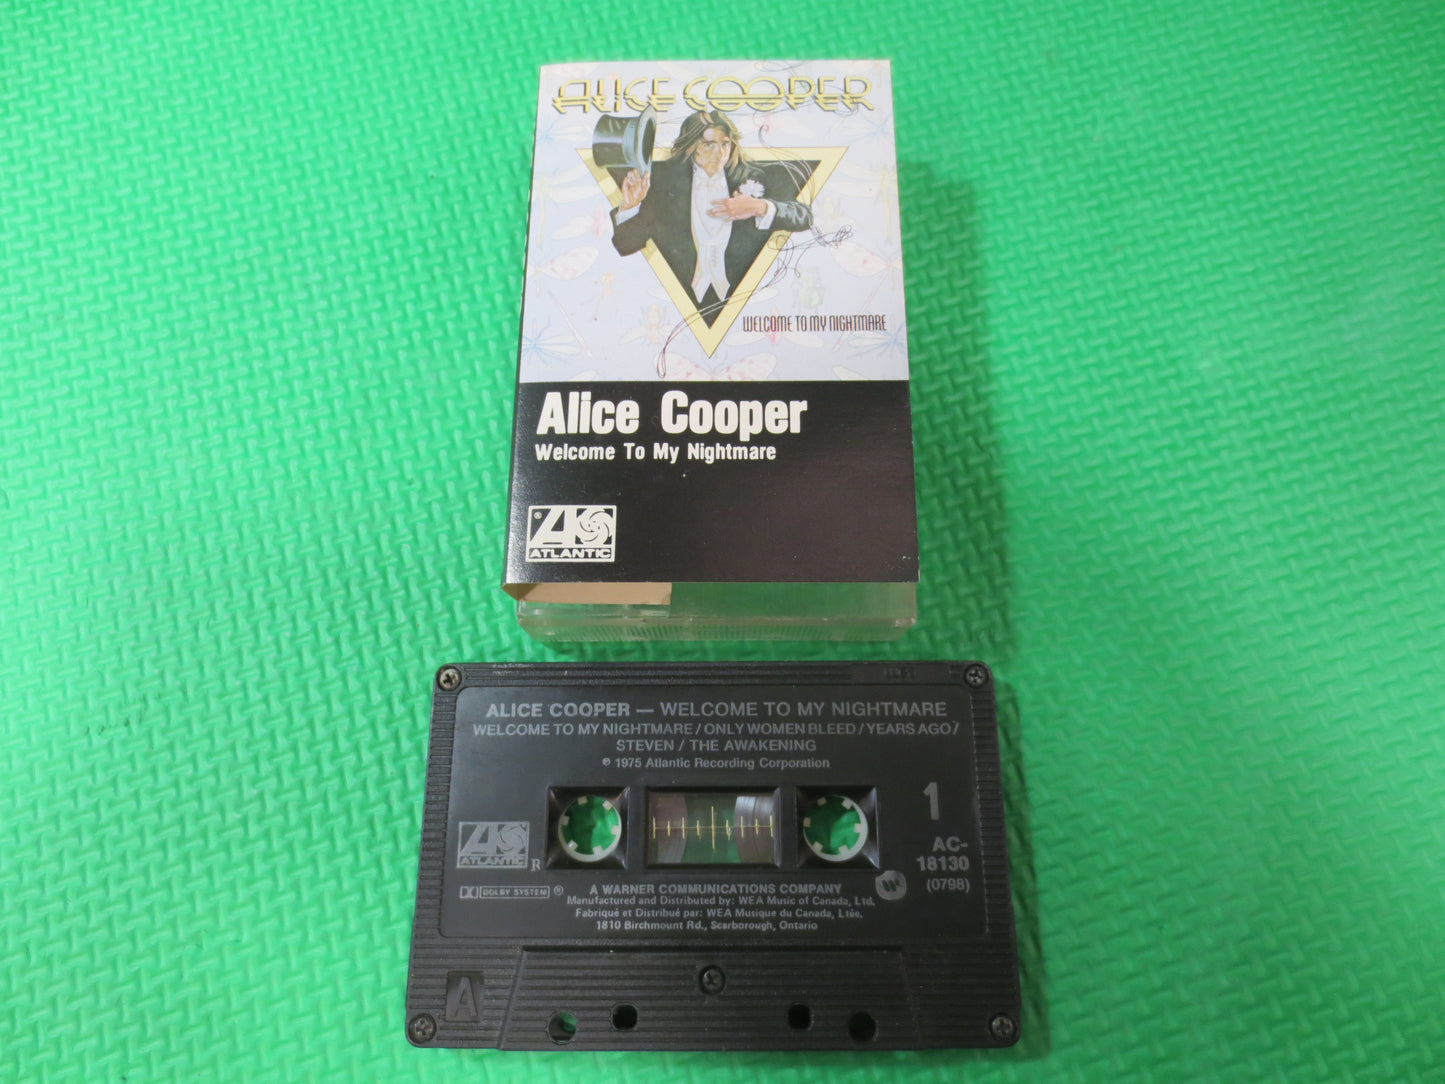 ALICE COOPER Tape, Welcome To My NIGHTMARE, Alice Cooper Album, Alice Cooper Music, Tape Cassette, Cassette, 1975 Cassette